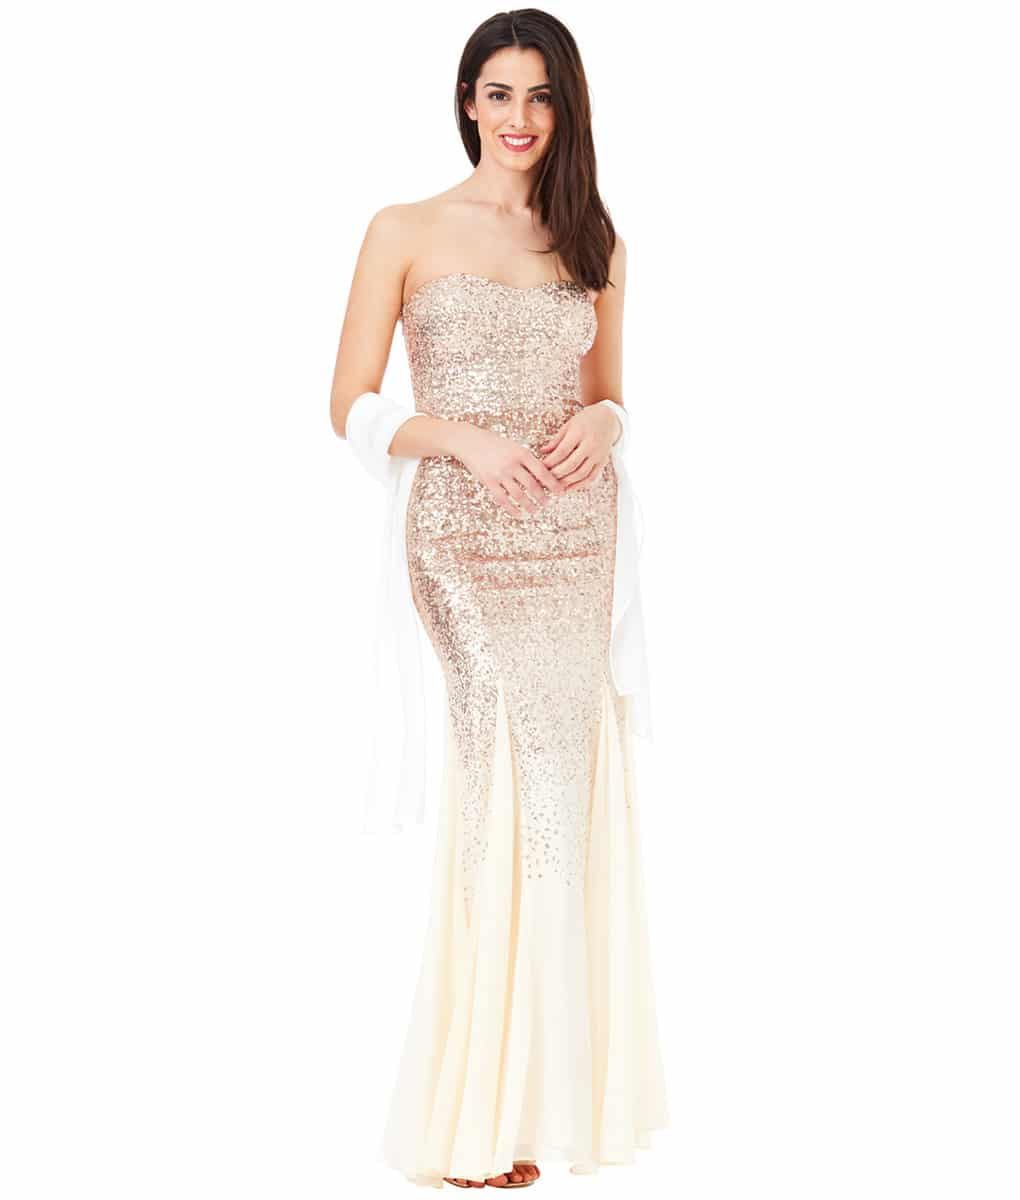 Alila Boutique Champagne Sequins Strapless Dress